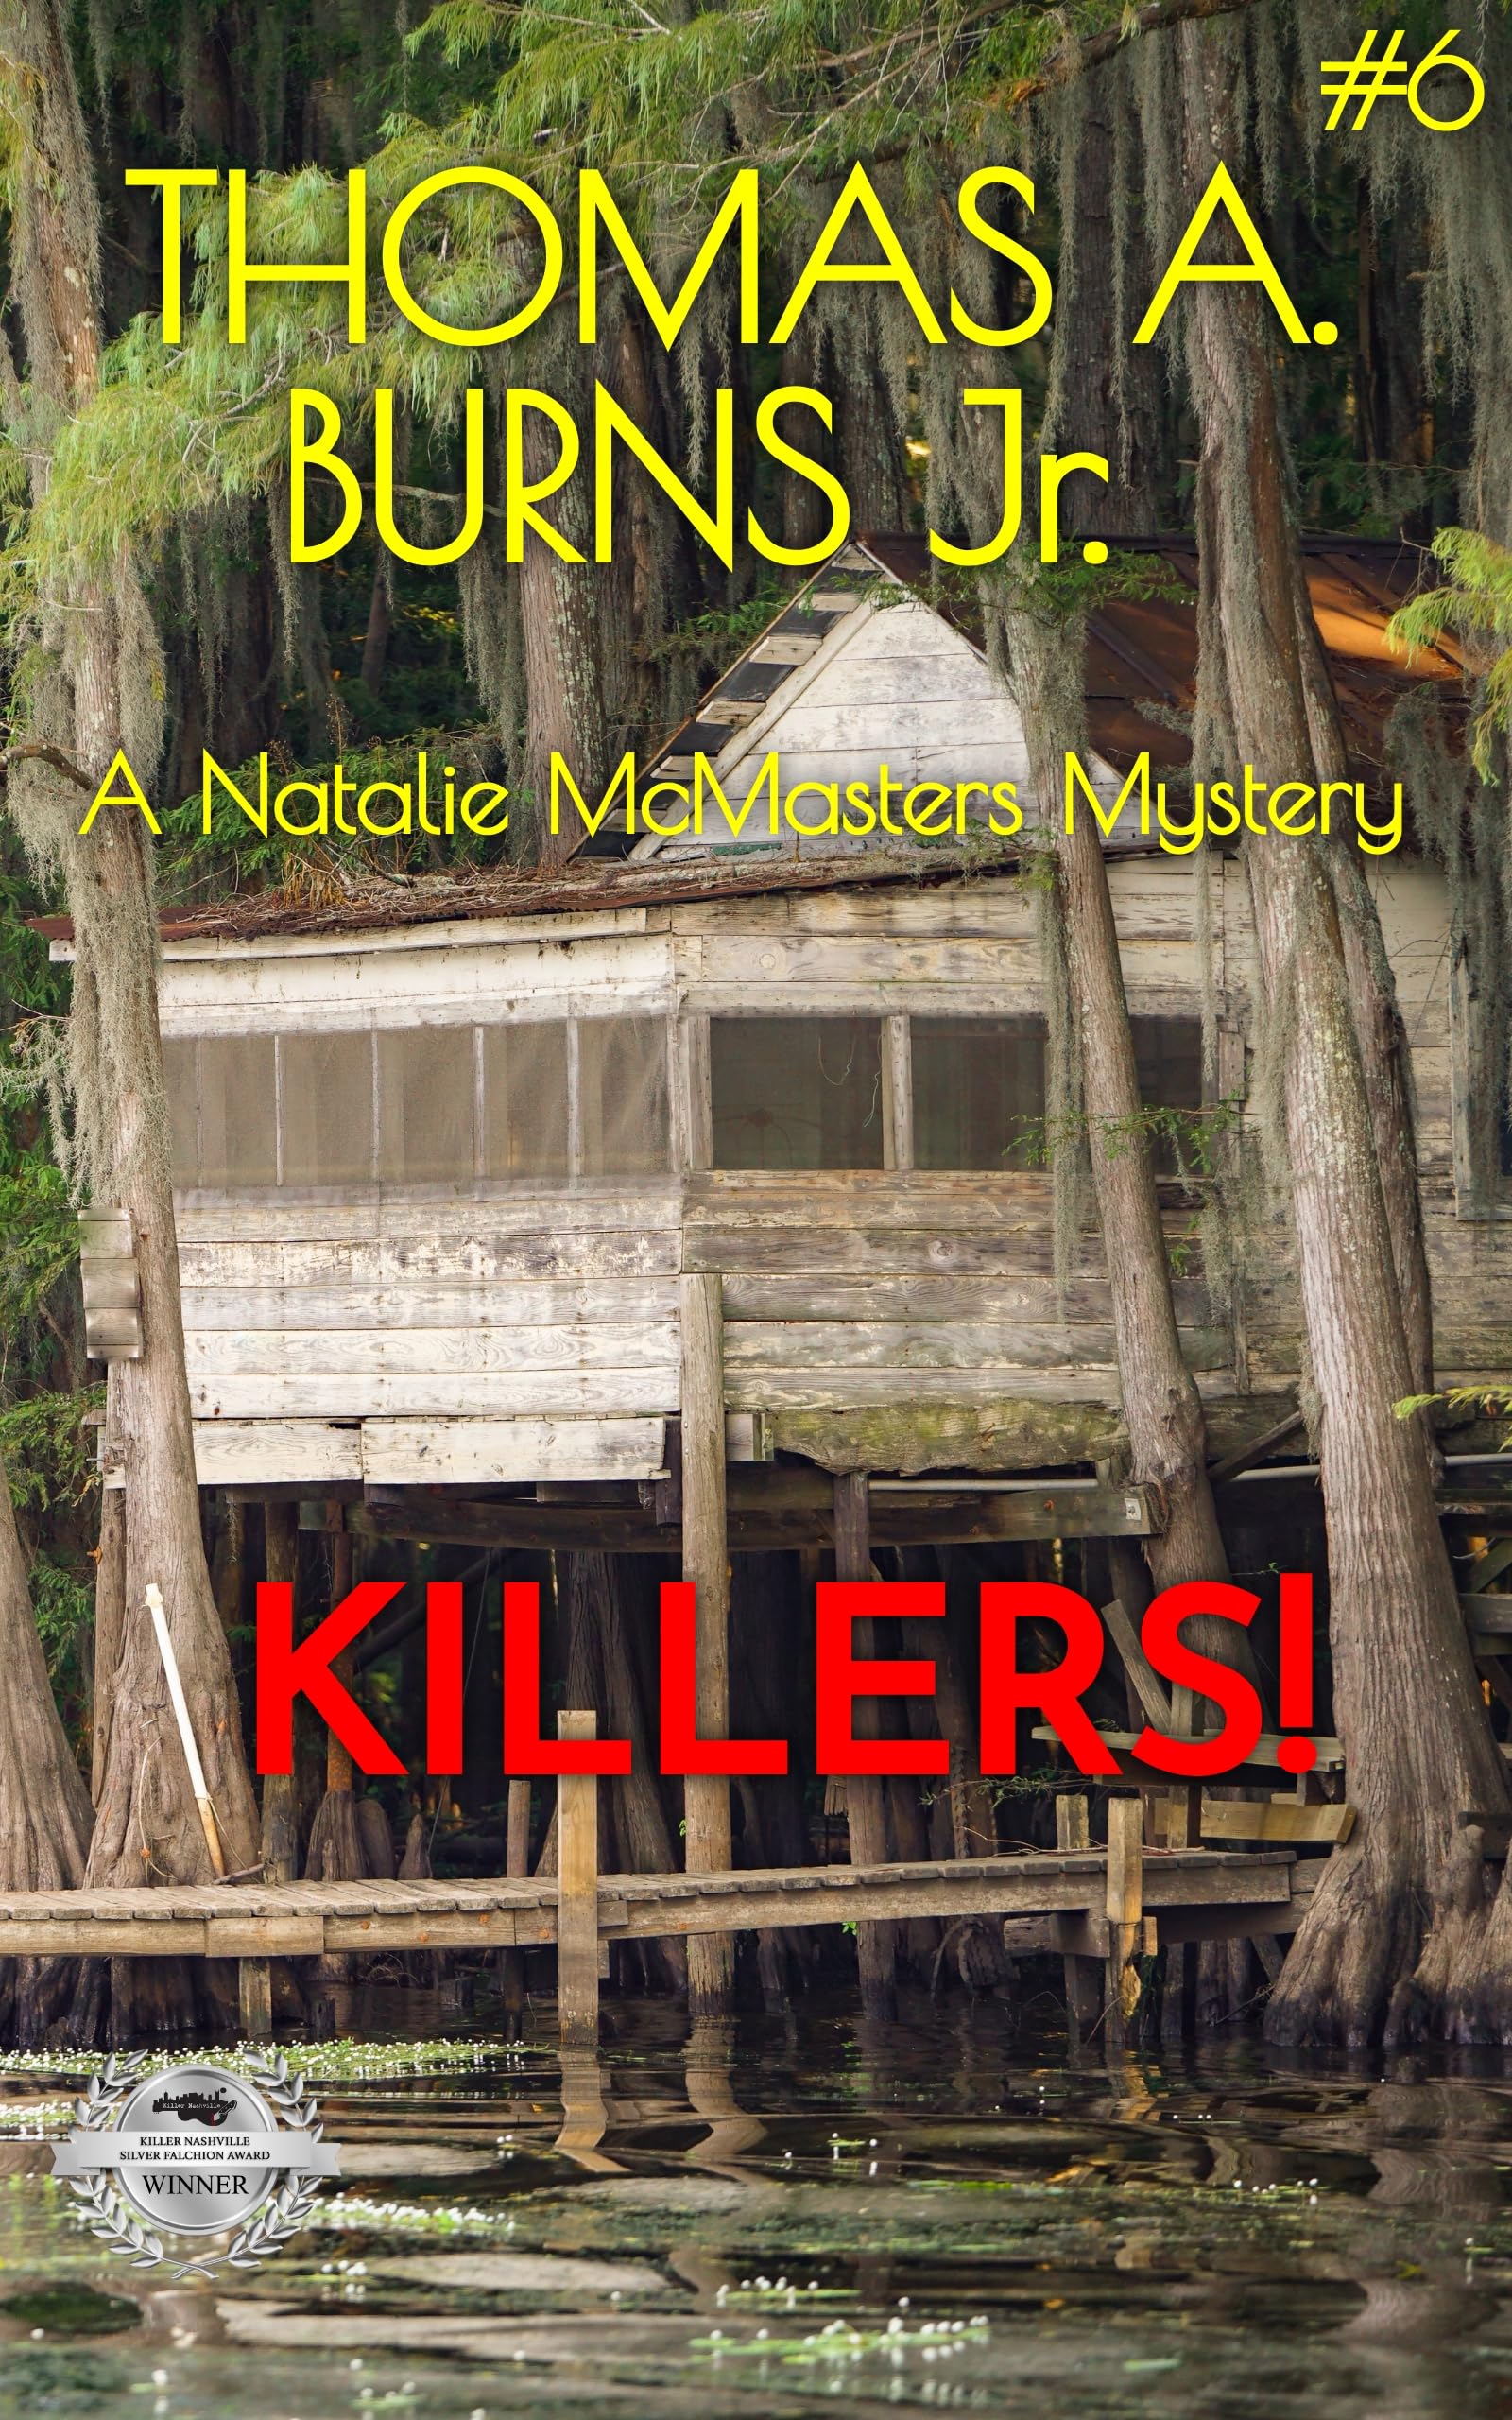 Killers!: A Natalie McMasters Mystery (The Natalie McMasters Mysteries Book 6)